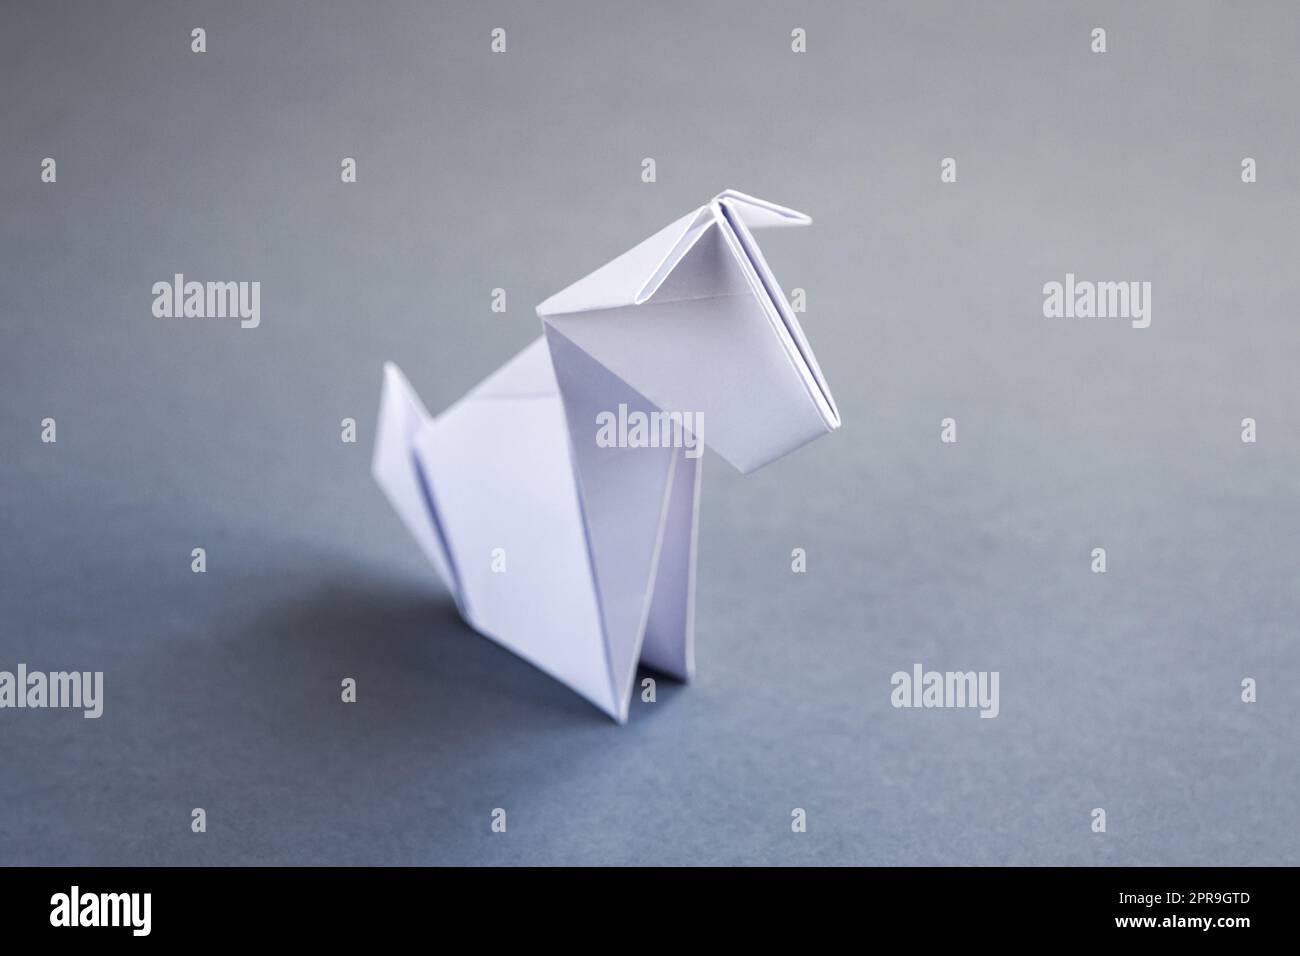 White paper dog origami isolated on a grey background Stock Photo